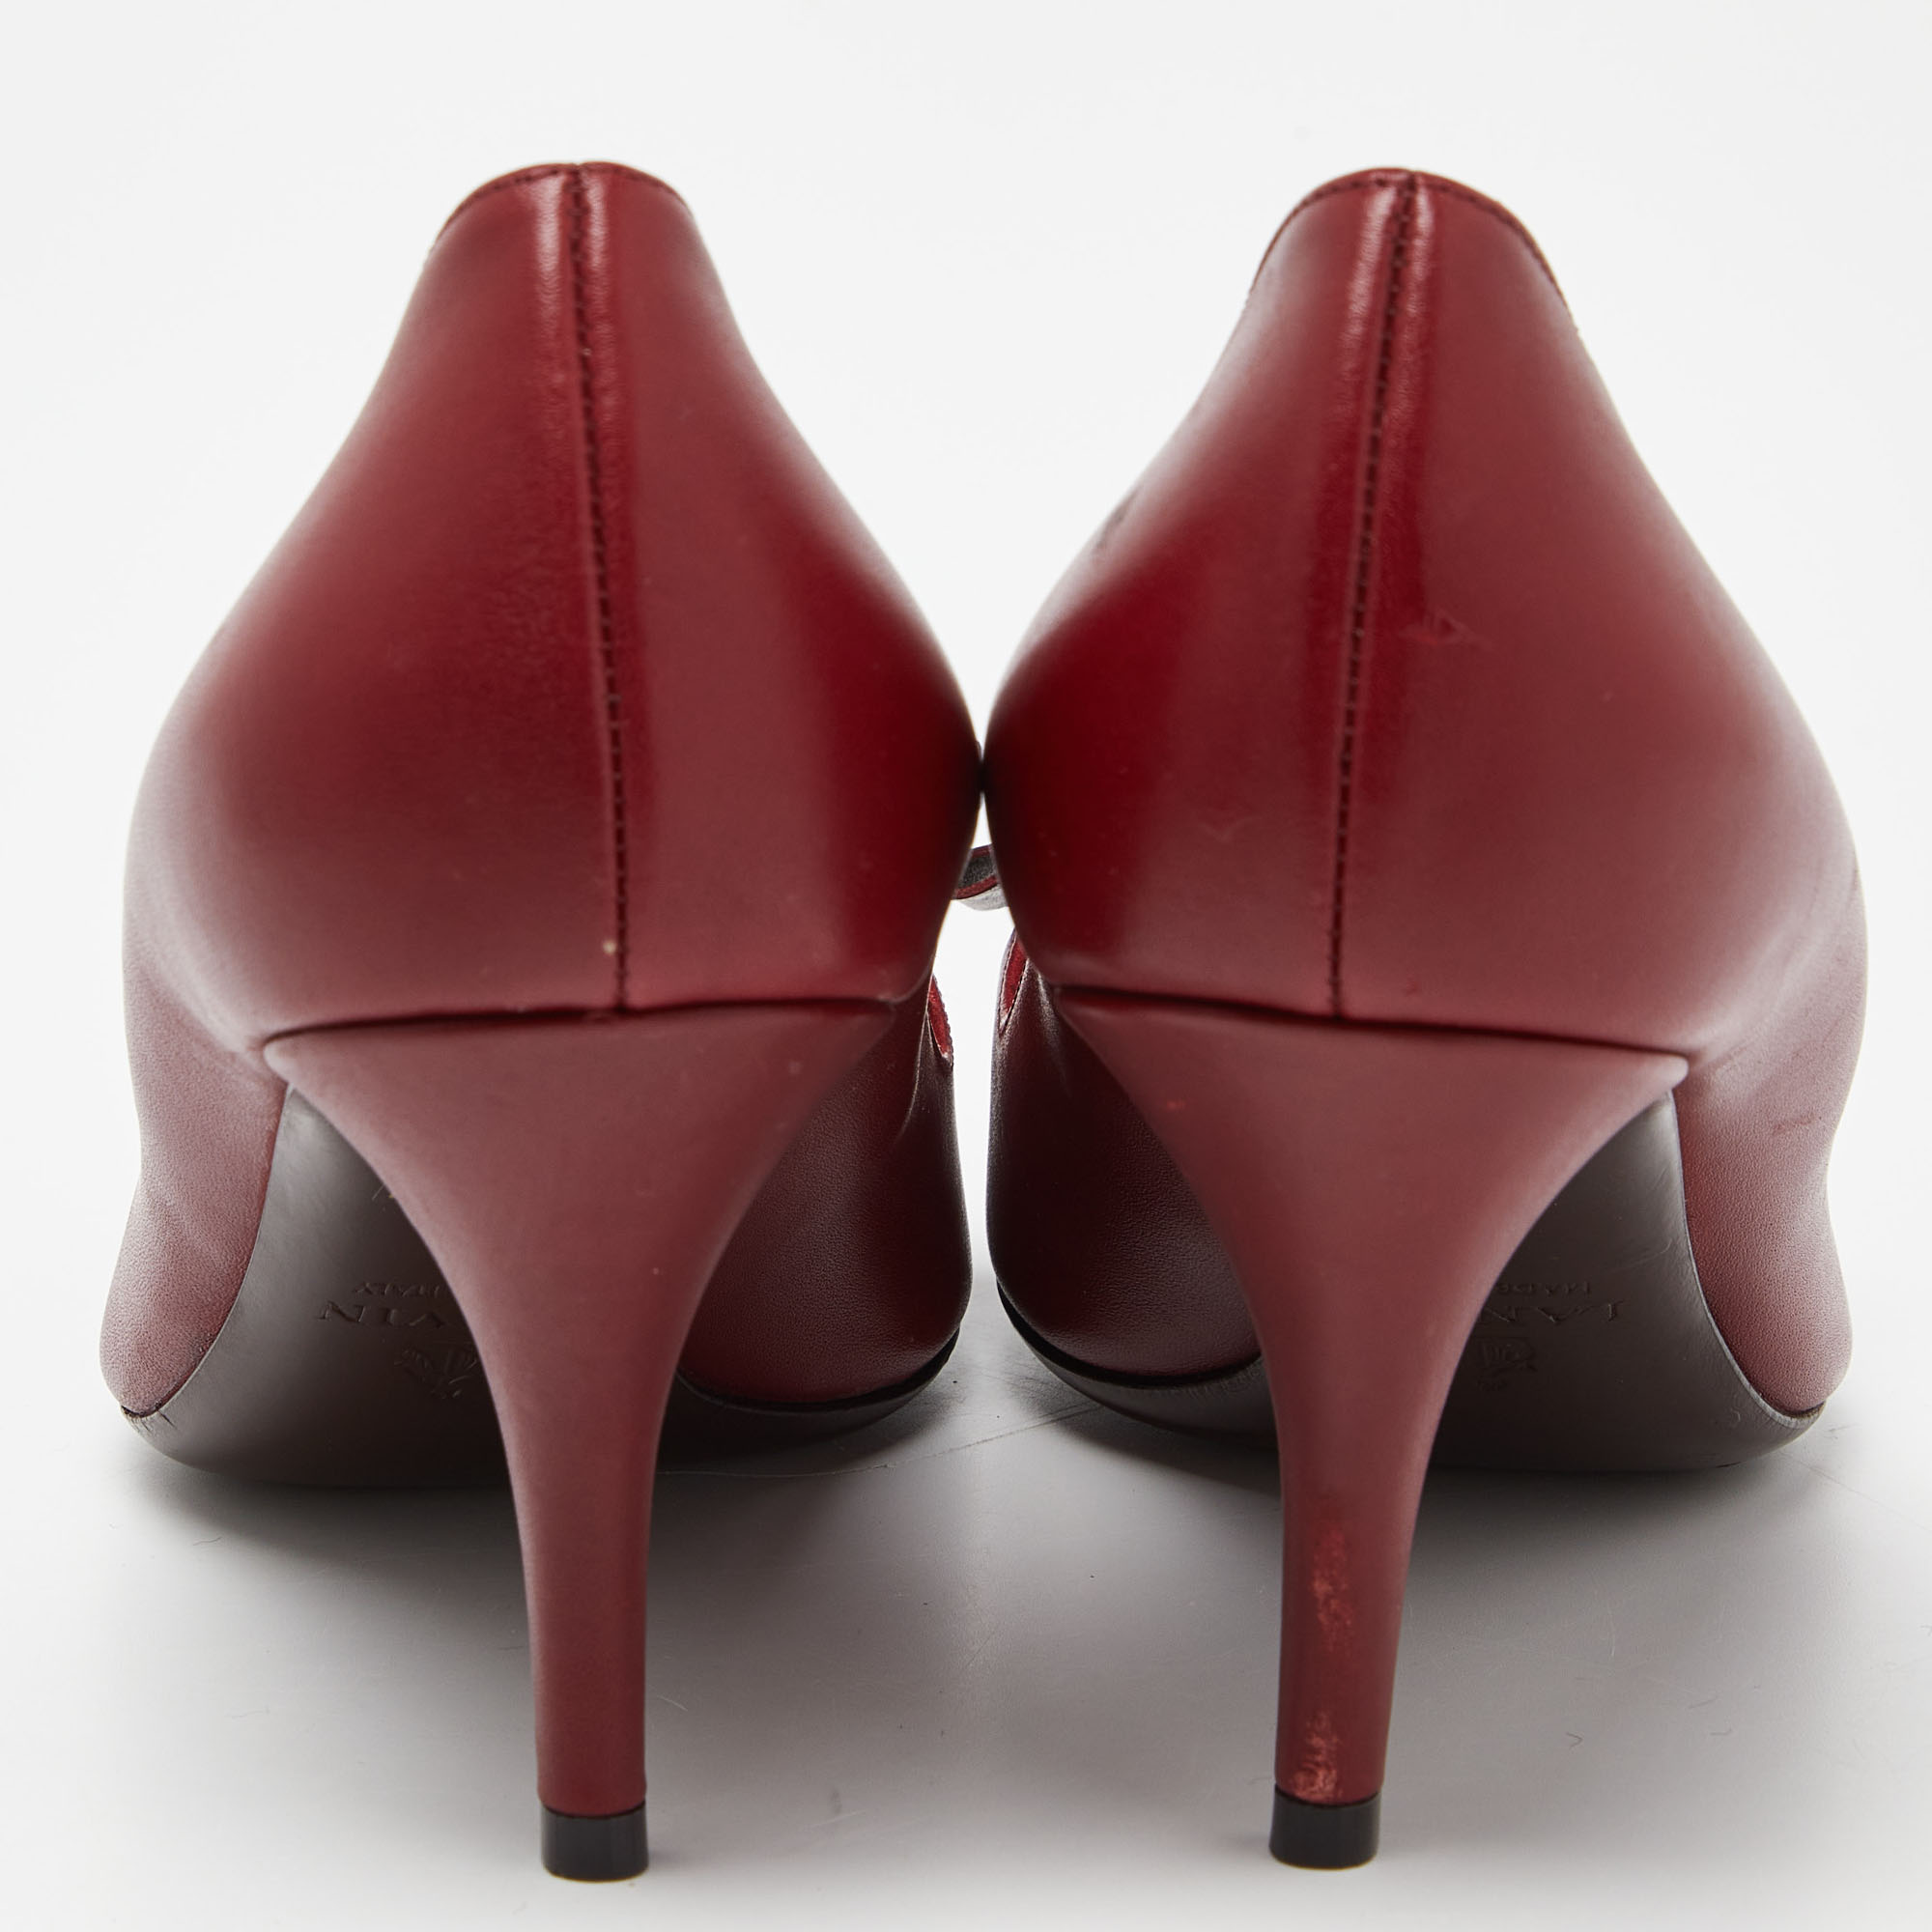 Lanvin Red Leather Bow Pointed Toe Pumps Size 39